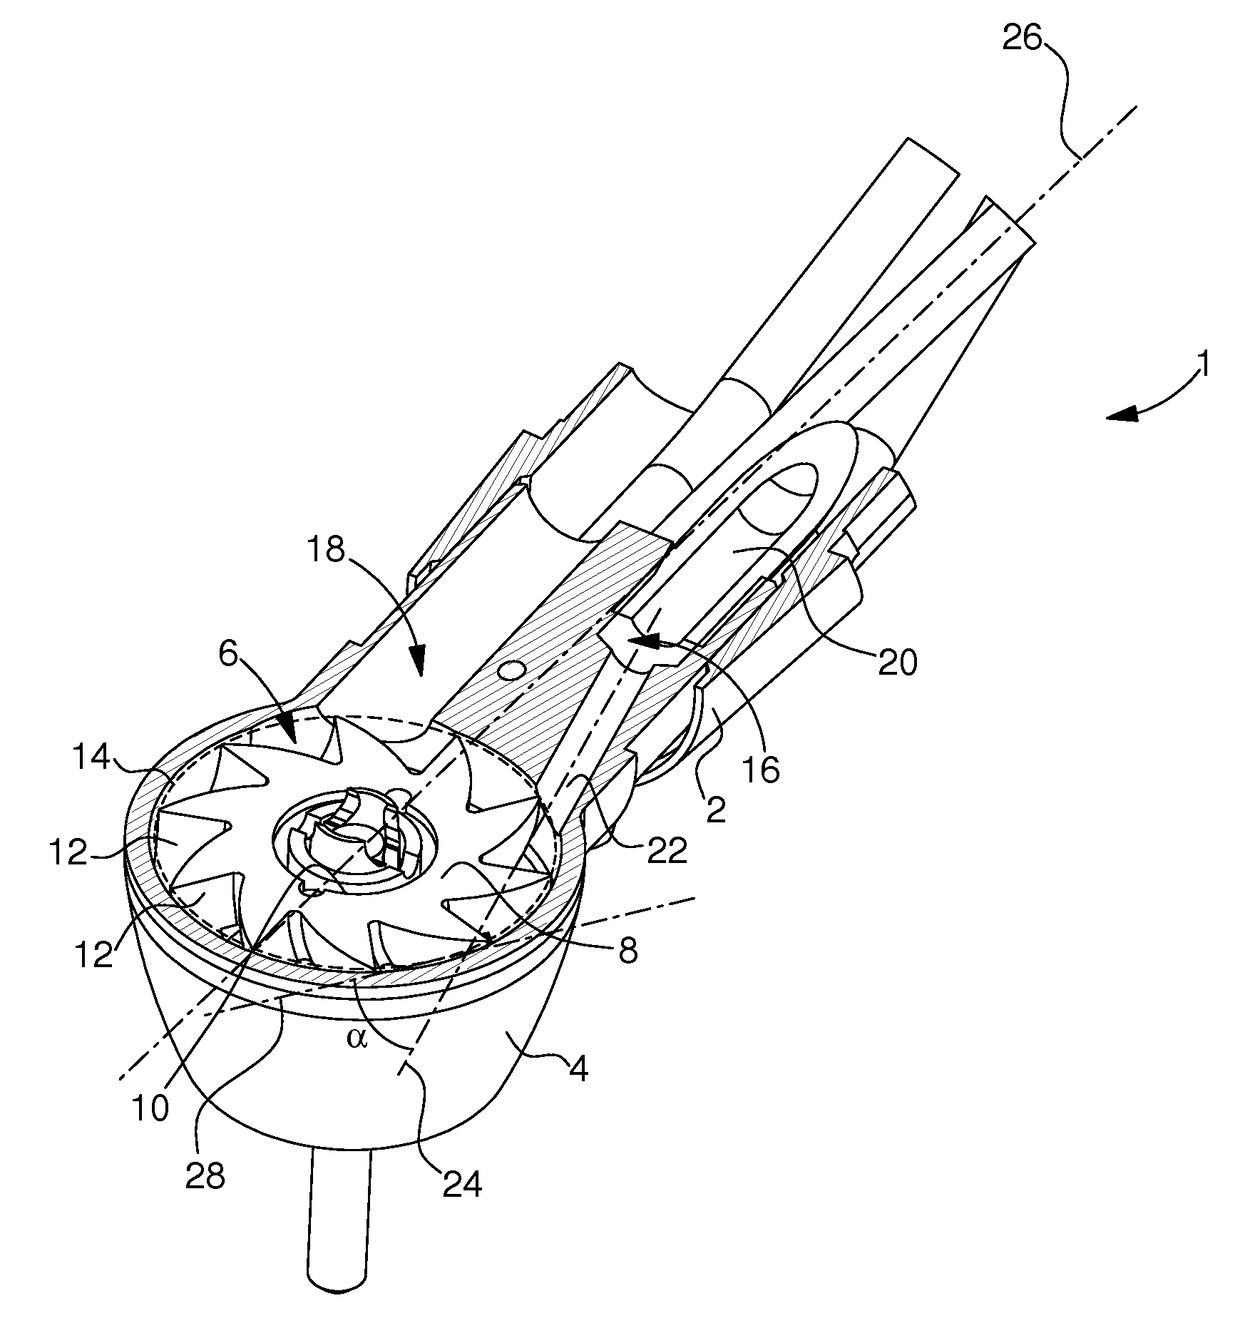 Dental or surgical compressed air handpiece and turbine for such a handpiece